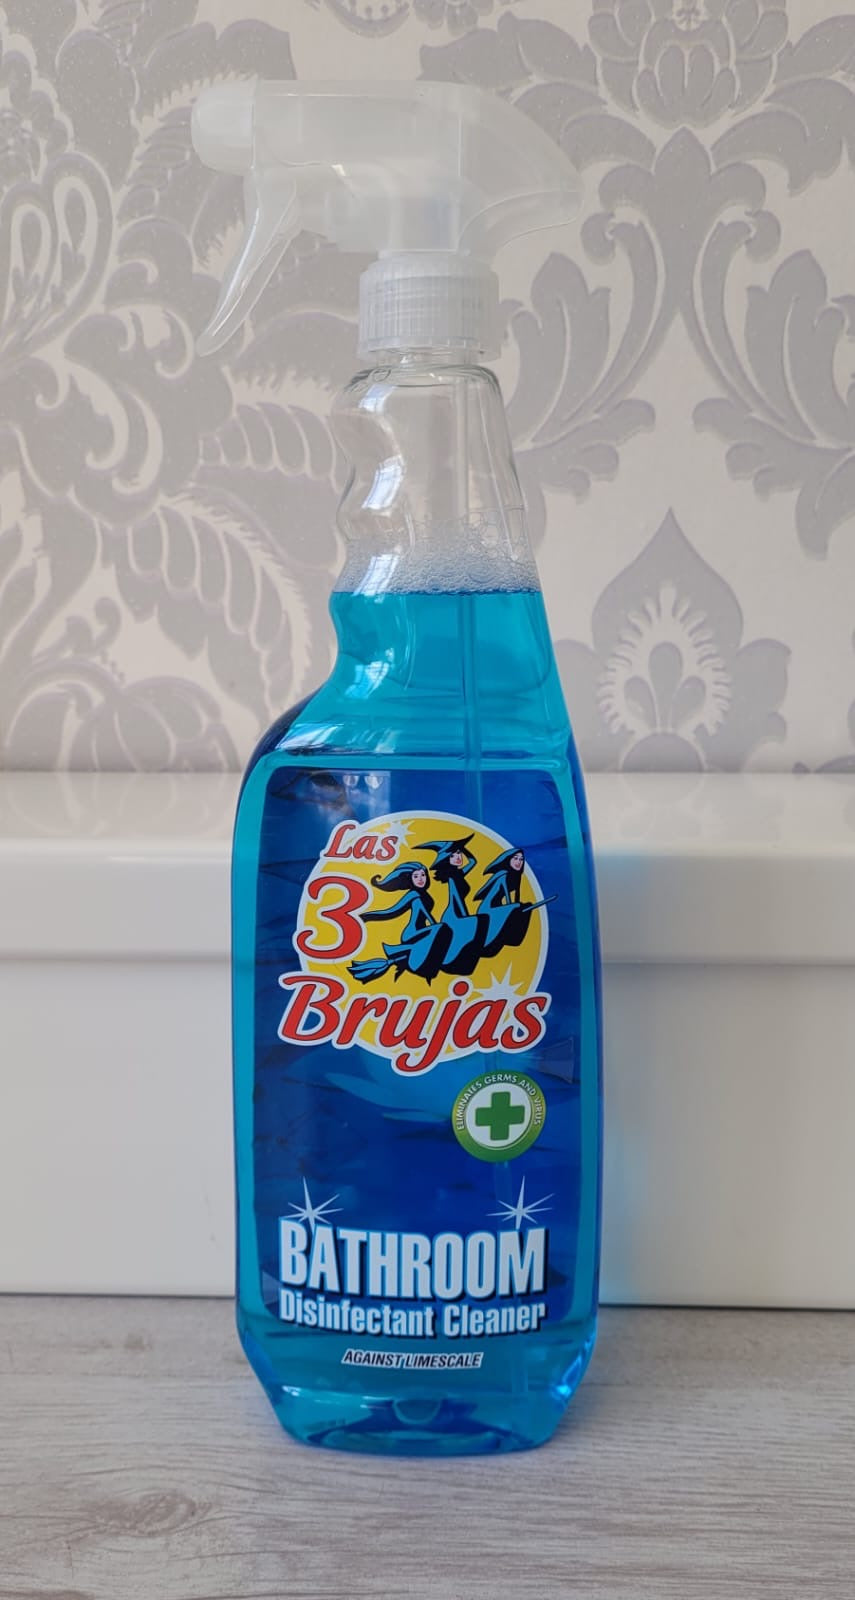 3 Brujas (3 witches) disinfectant spray 750ml💎